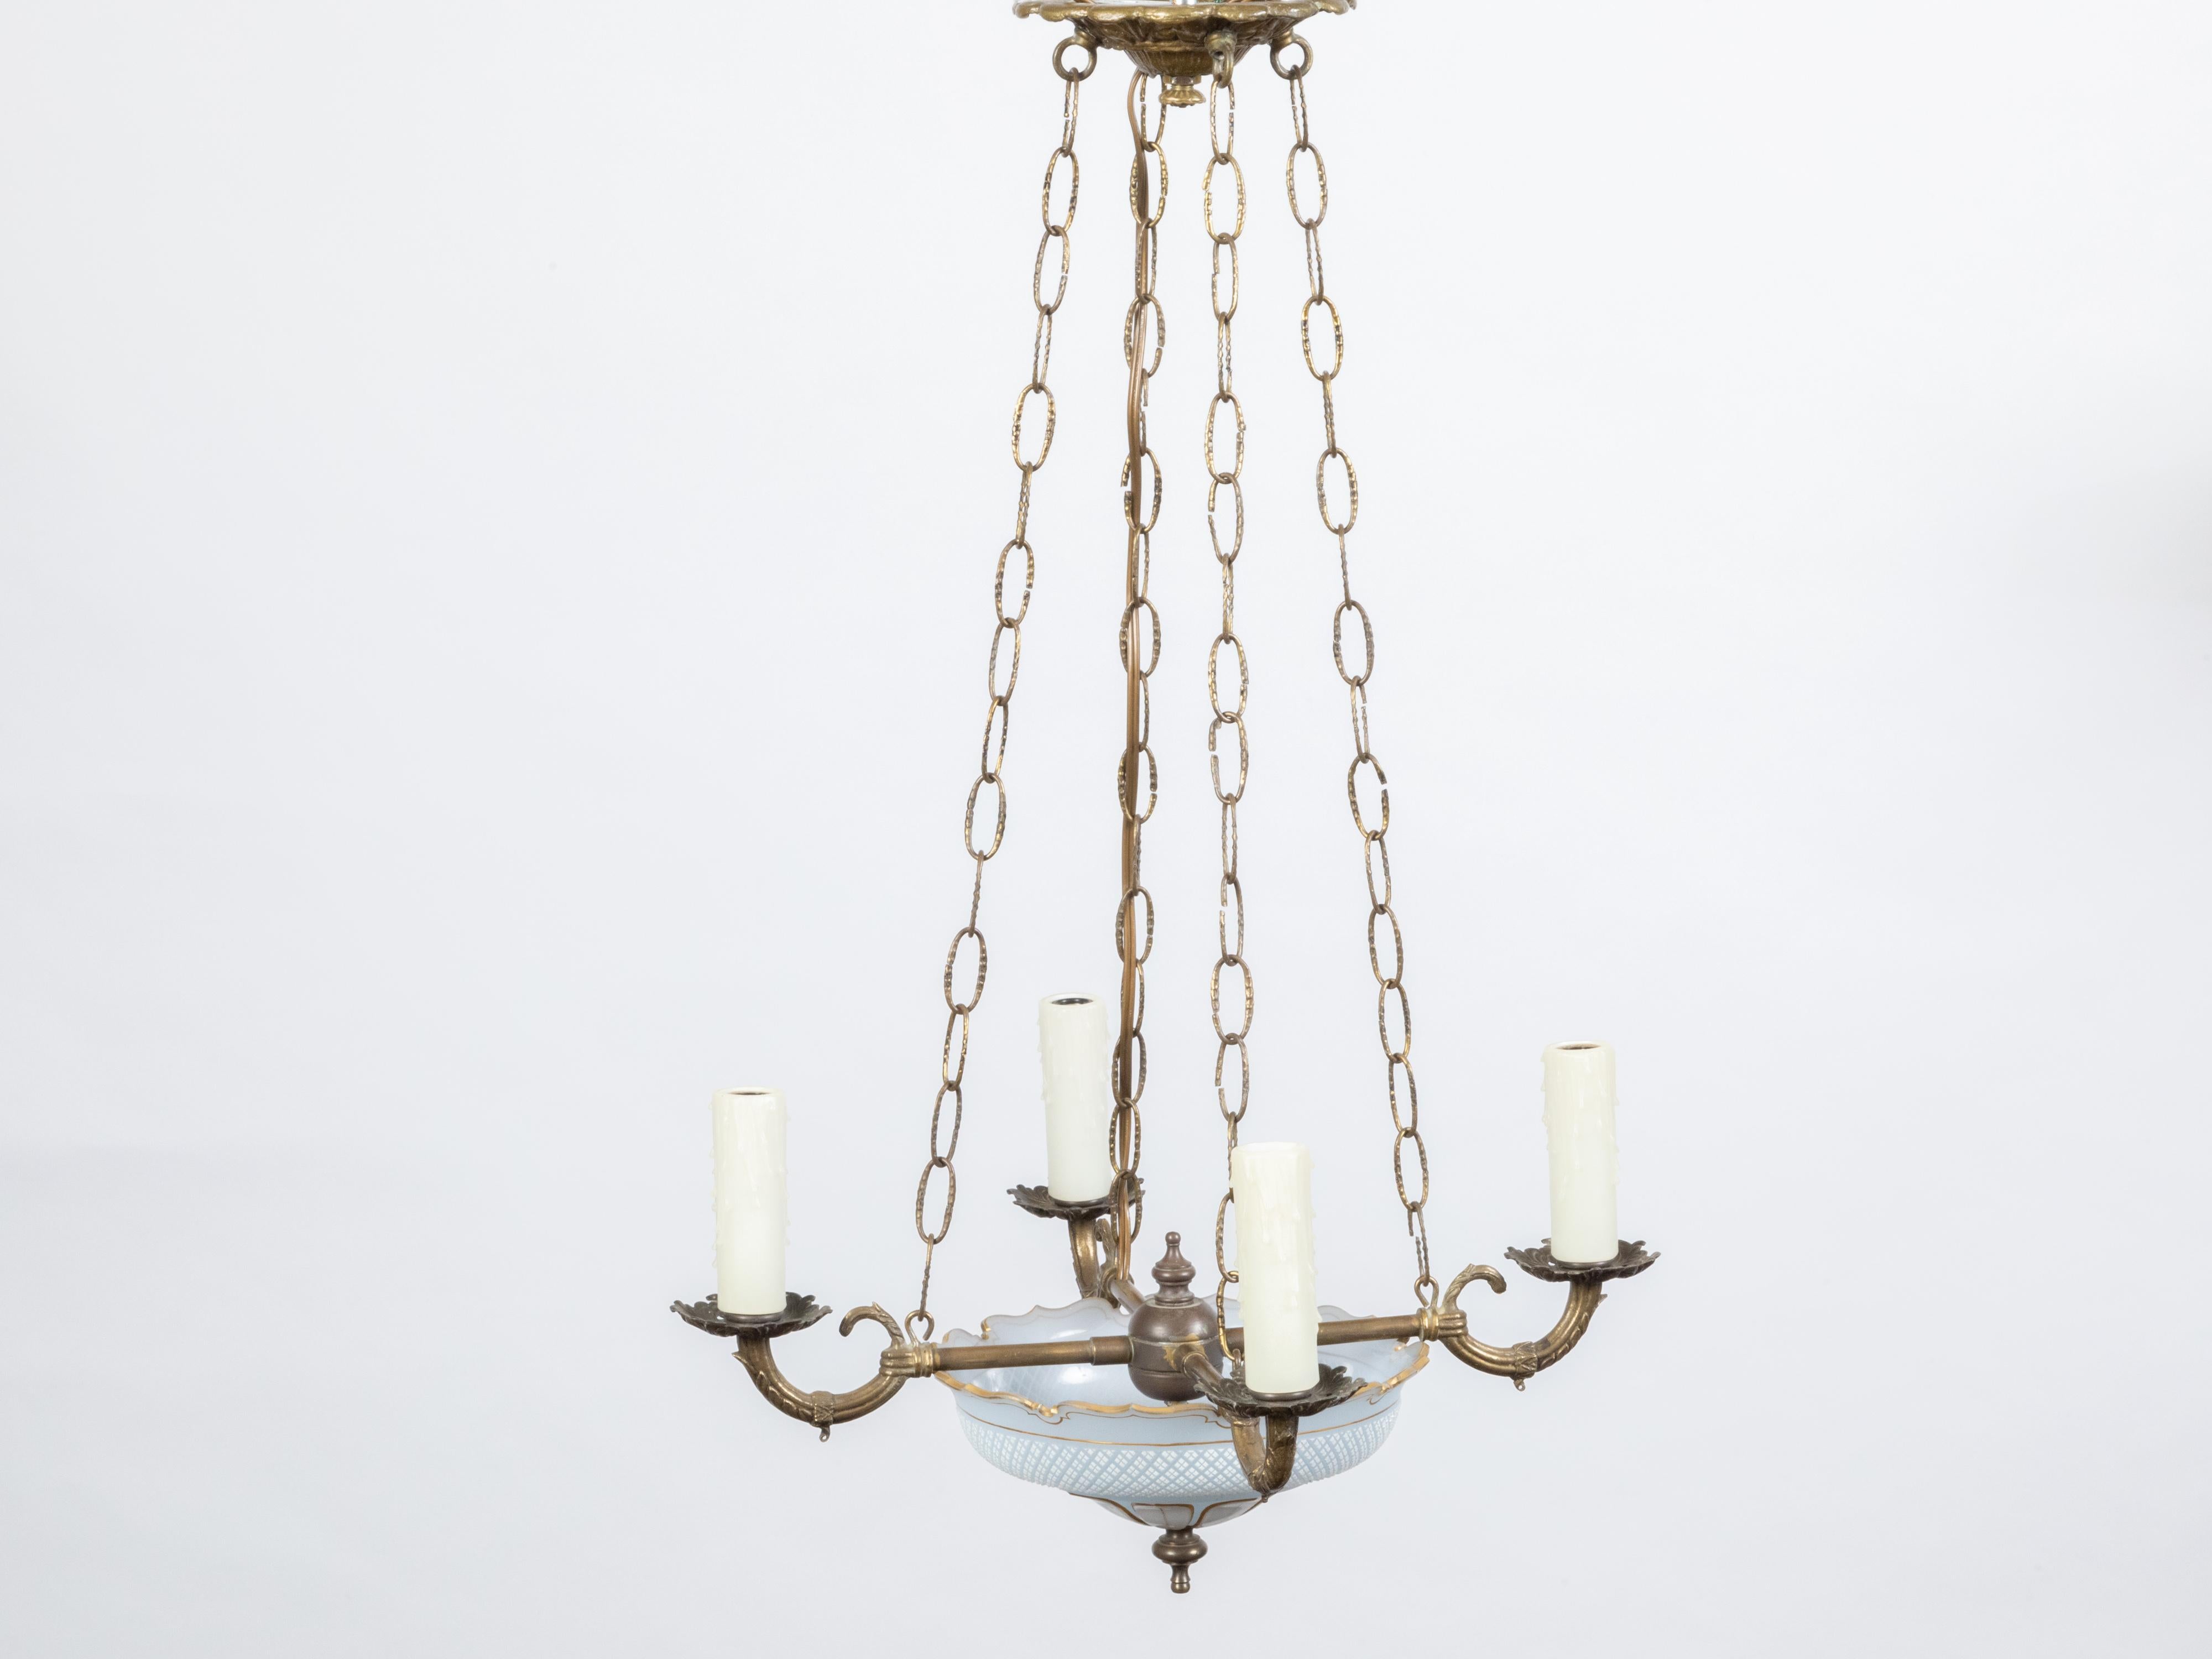 French 1900s Opaline Four-Light Chandelier with Leaf Motifs and Profiled Links In Good Condition For Sale In Atlanta, GA